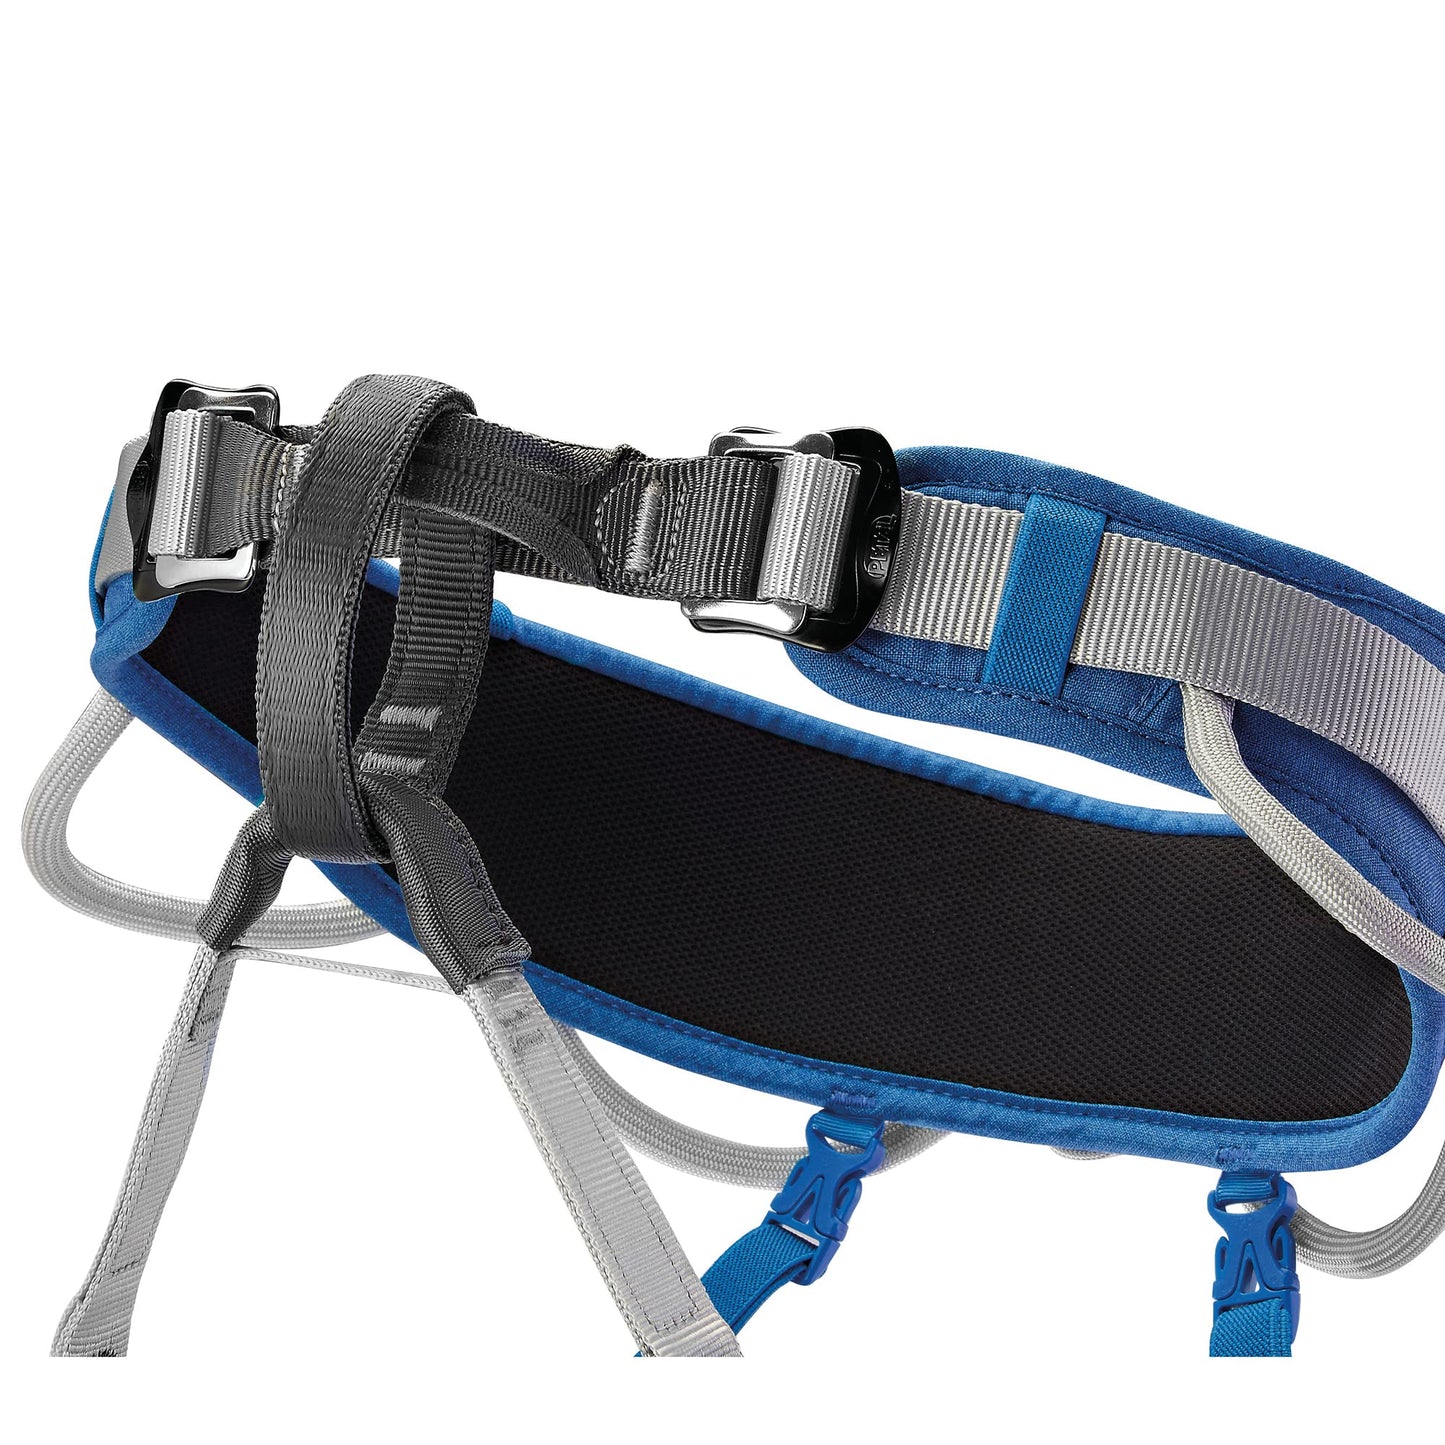 PETZL, Corax, Harness For Climbing And Mountaineering Multipurpose, Blue, 1, Unisex-Adult